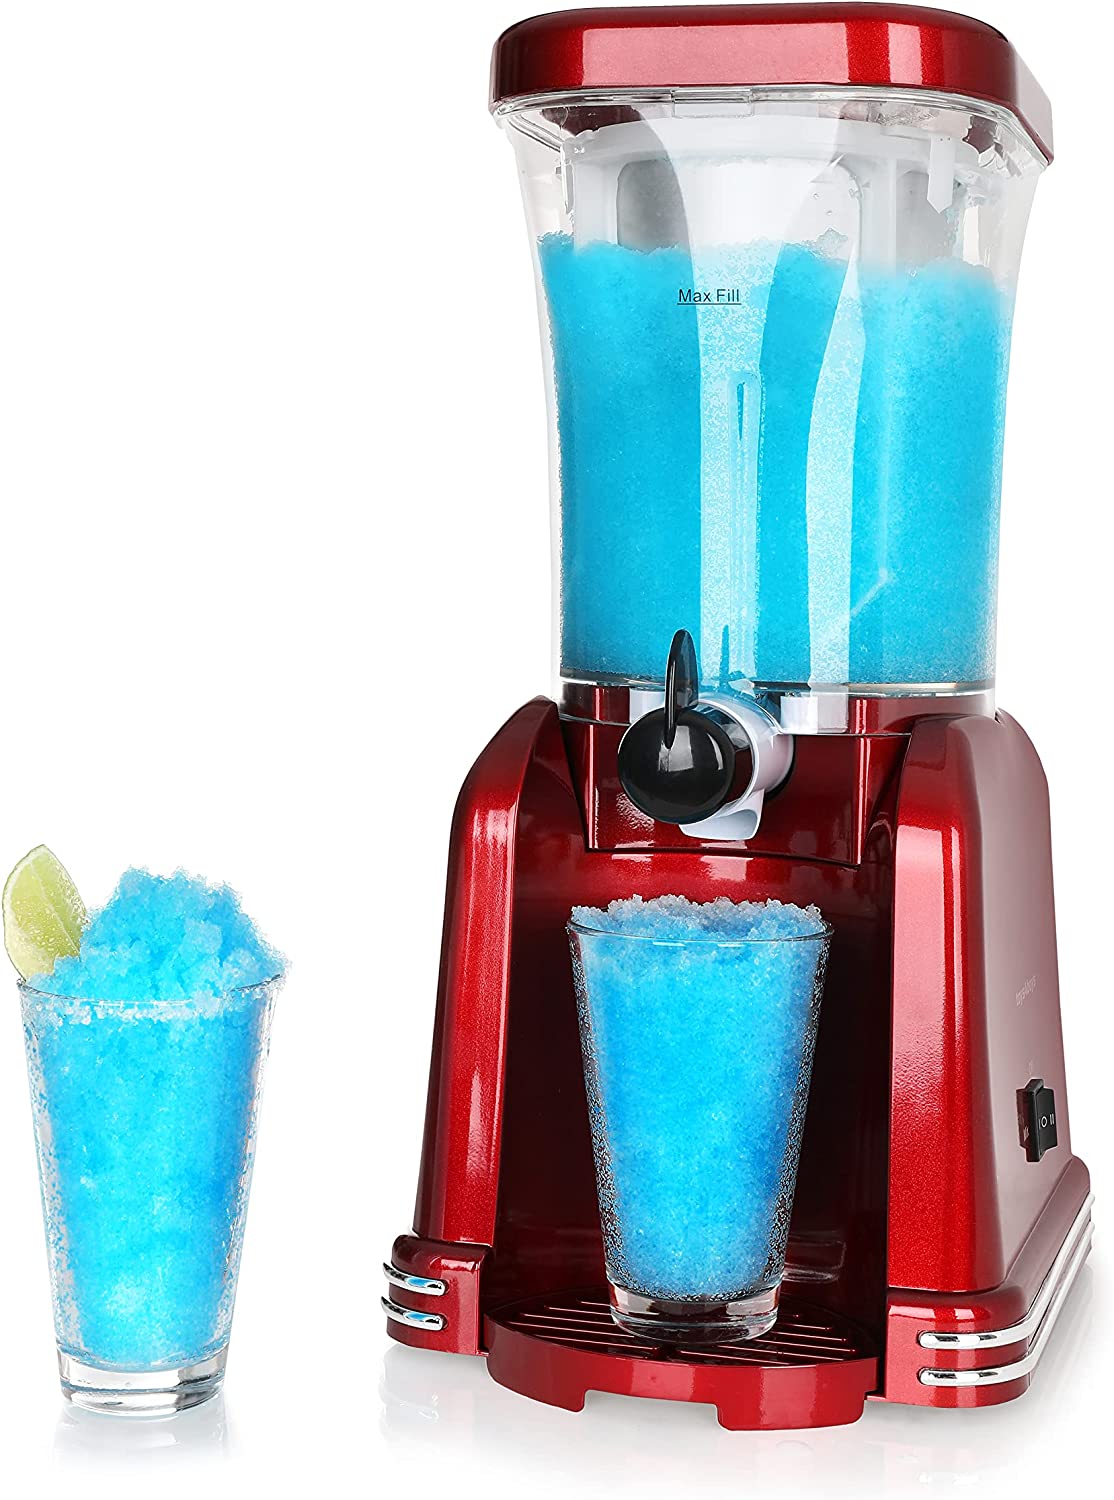 Toys4Boys Frozen Slushy Maker Slush Machine for Home Ice Cream Maker Granita Machine Ideal Gift for Children\'s Birthday, Party, Anniversary, Summer Party, Wedding and Many Other Occasions.